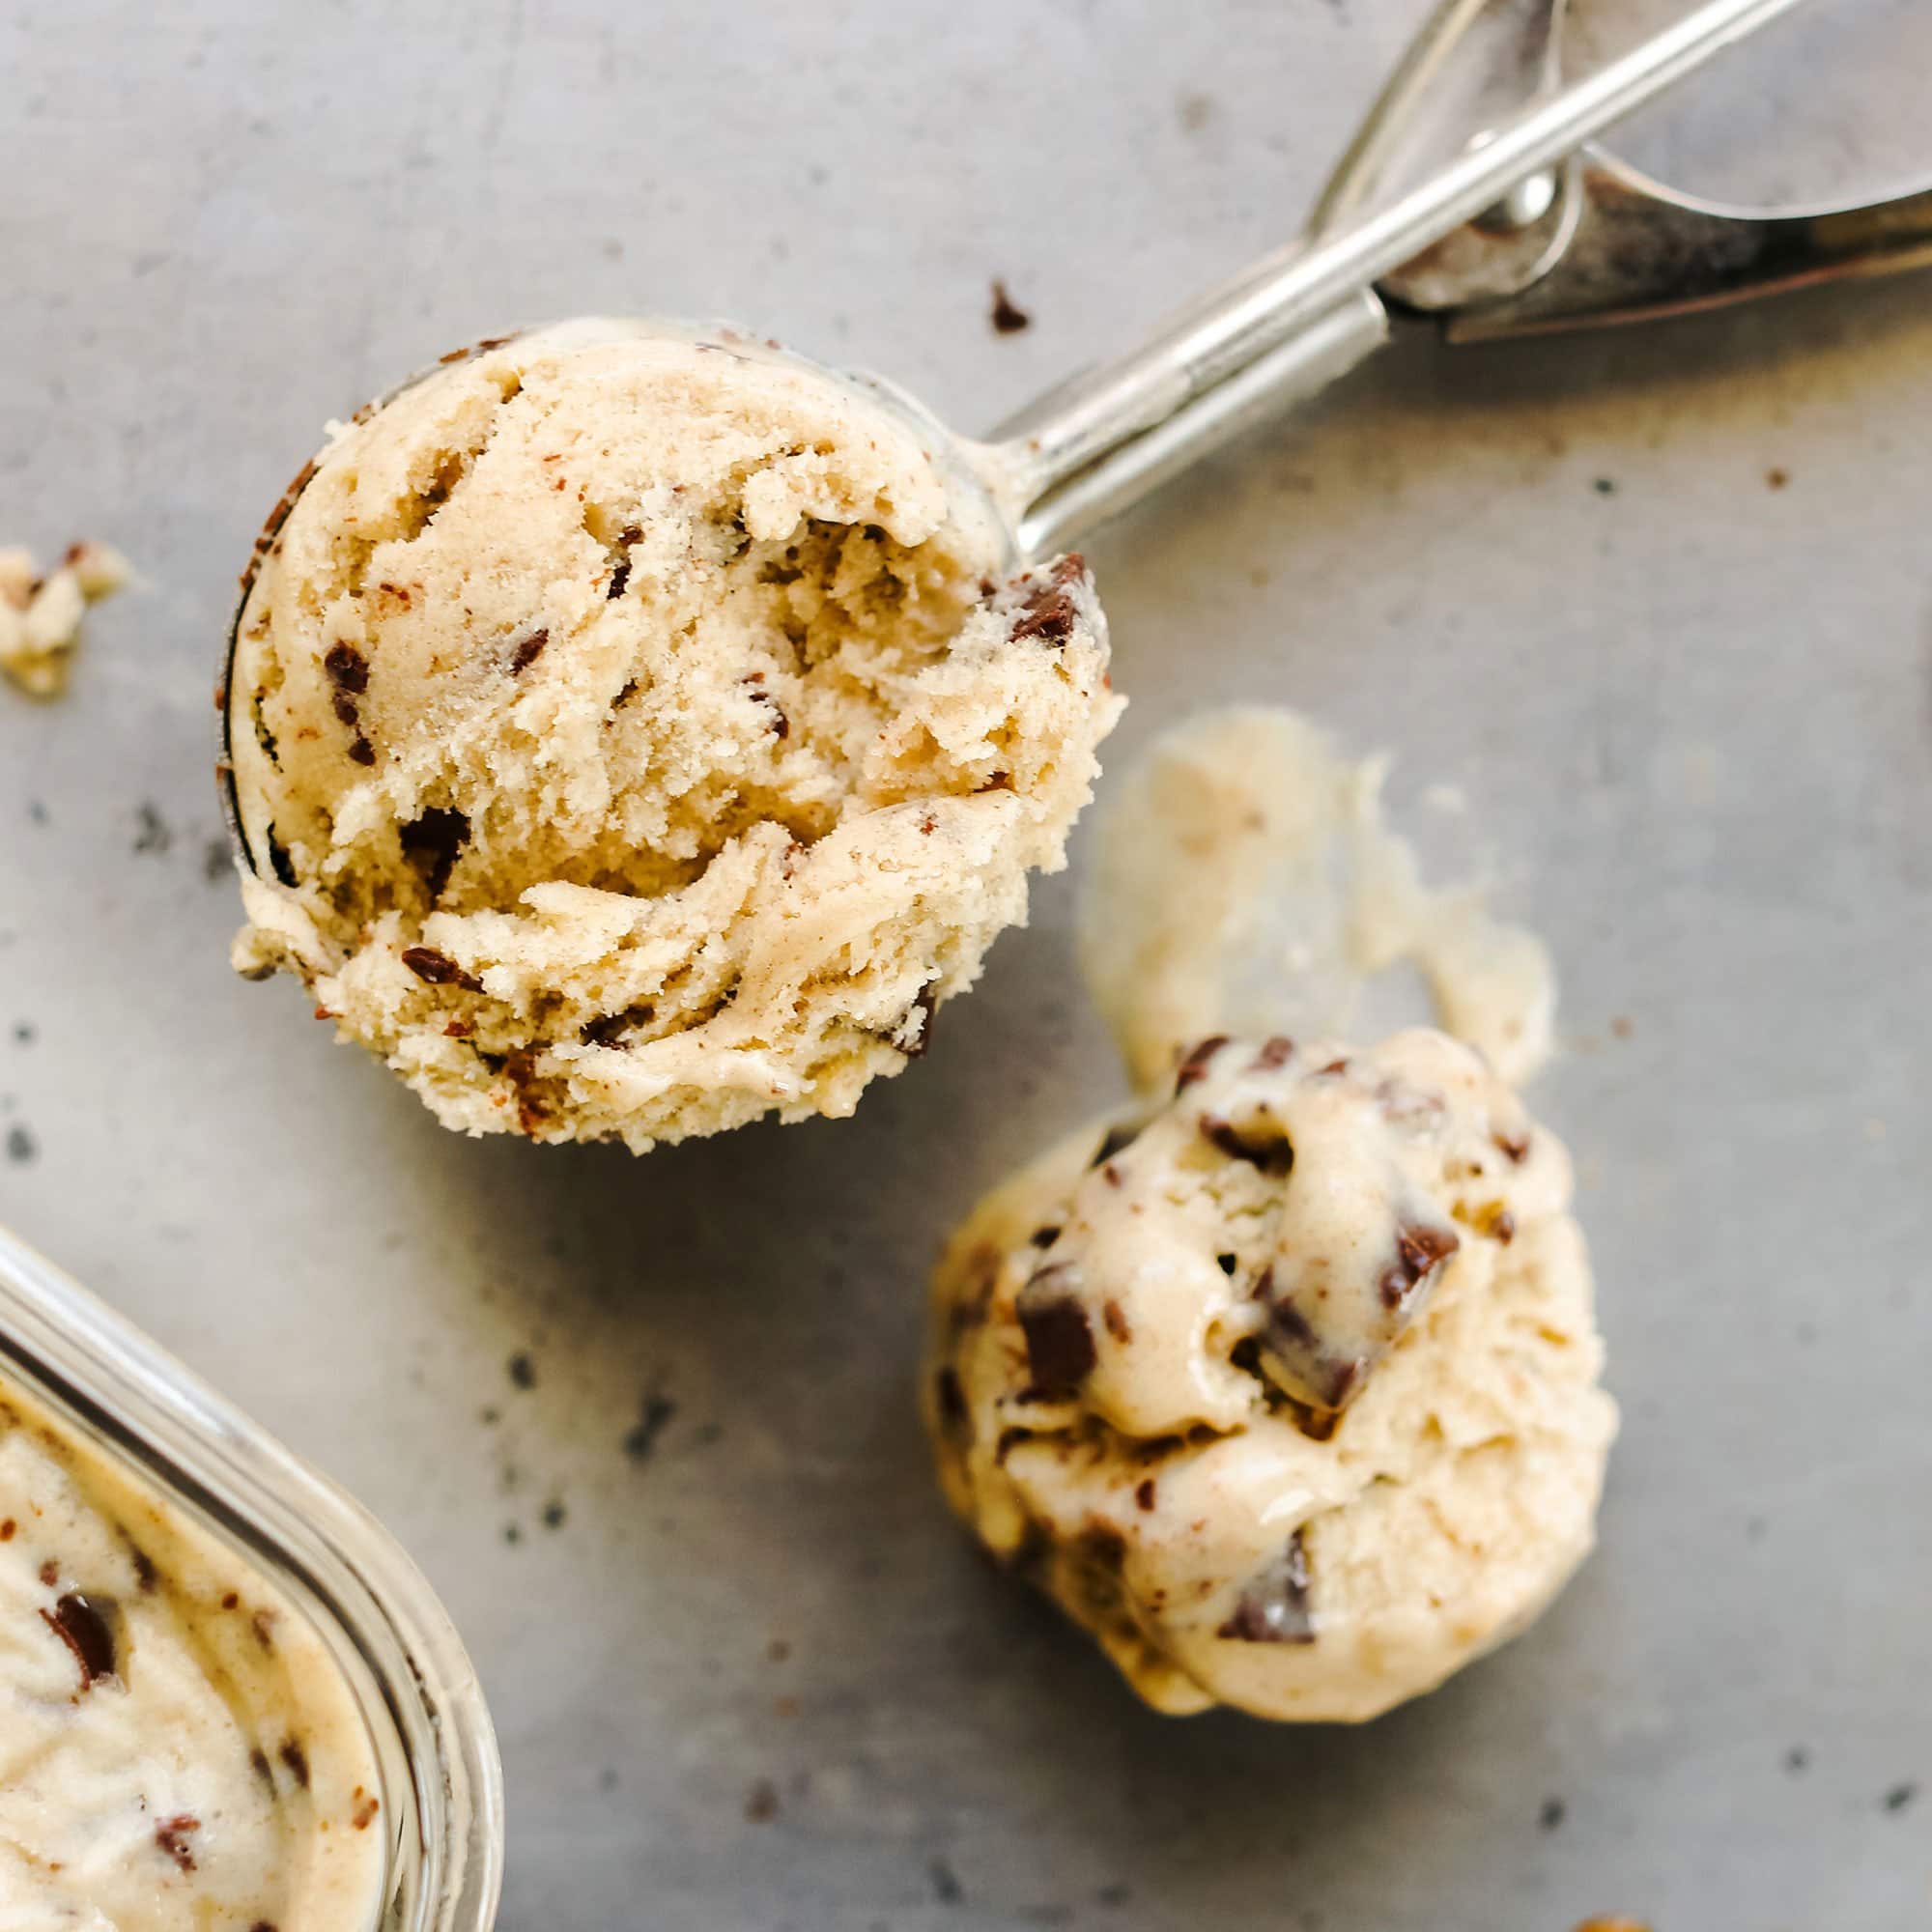 Roasted Banana Chocolate Chunk Ice Cream is full of rich caramel and vanilla flavors with chunks of chocolate throughout. Egg-free recipe!